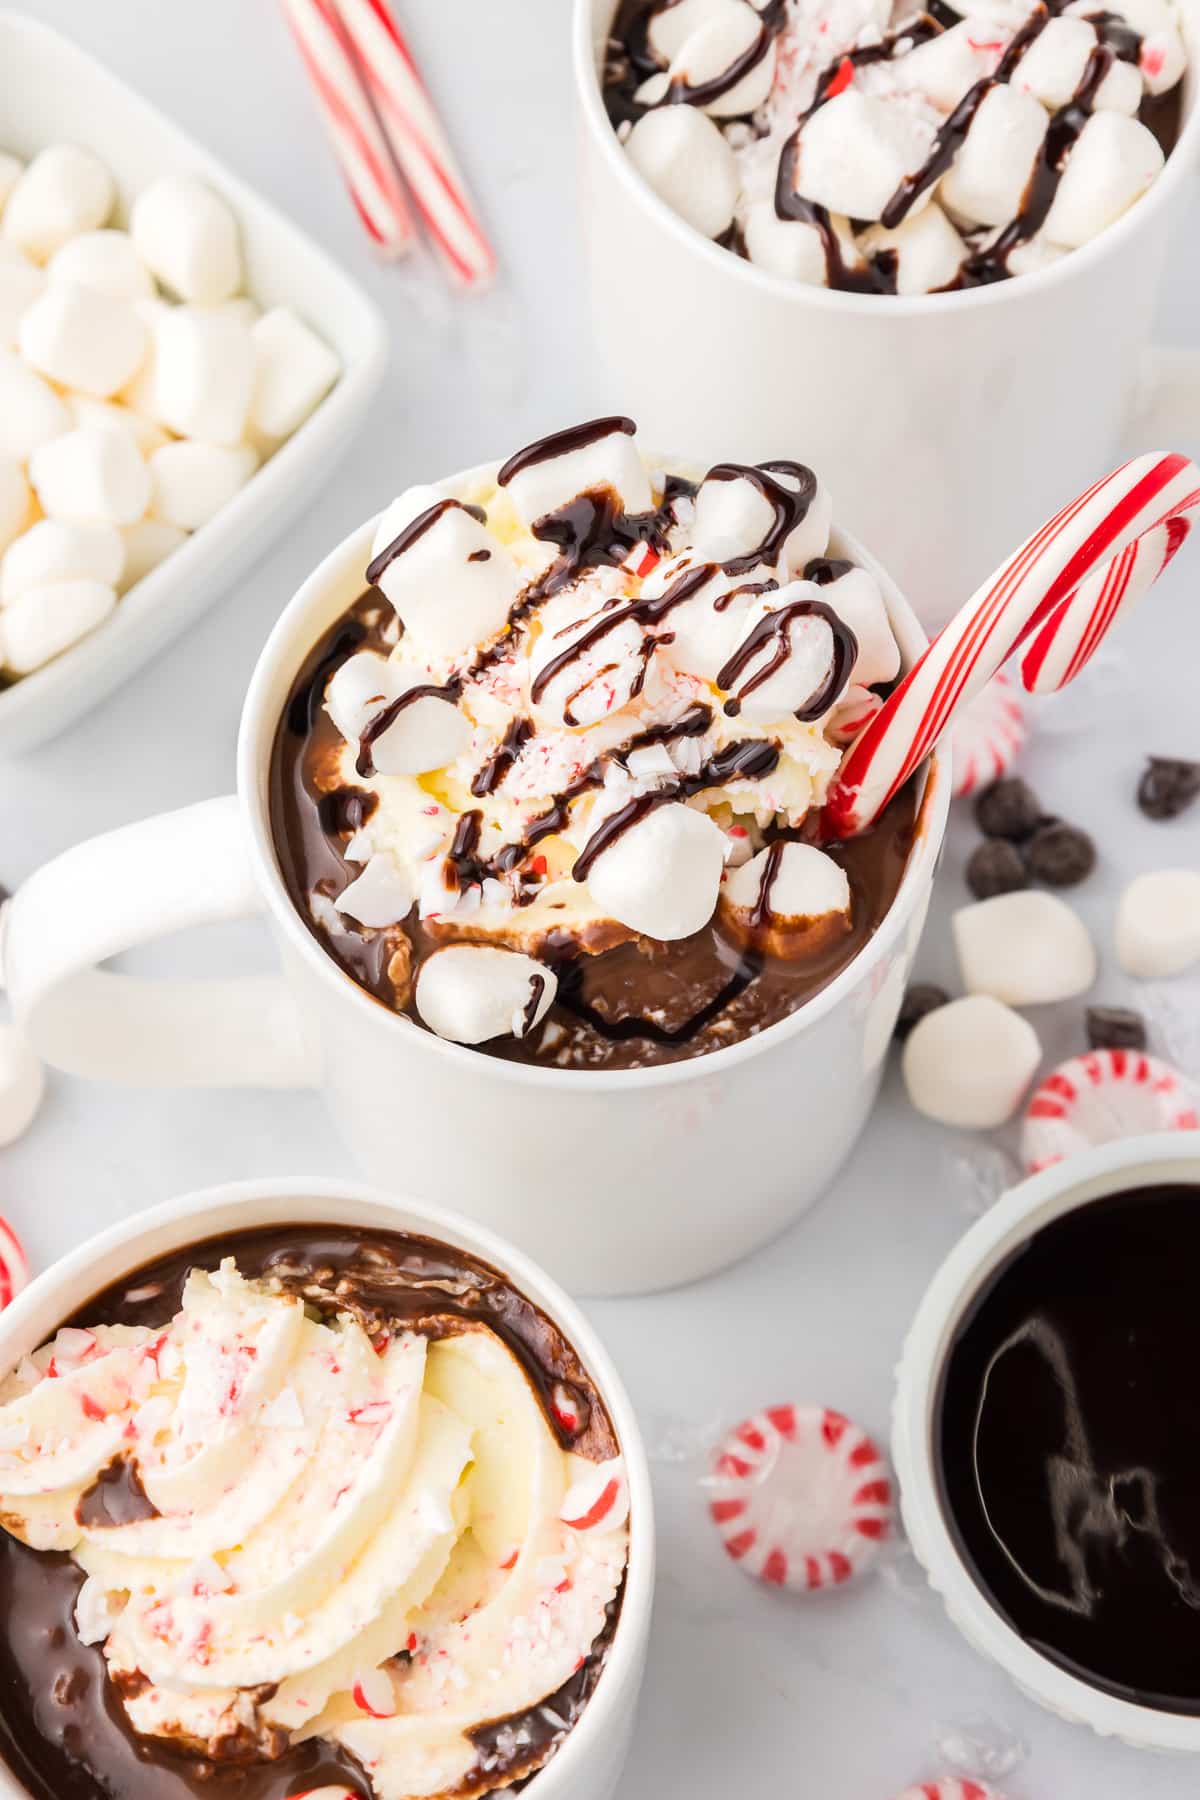 Three mugs of hot chocolate with candy canes, whipped cream and marshmallow toppings.